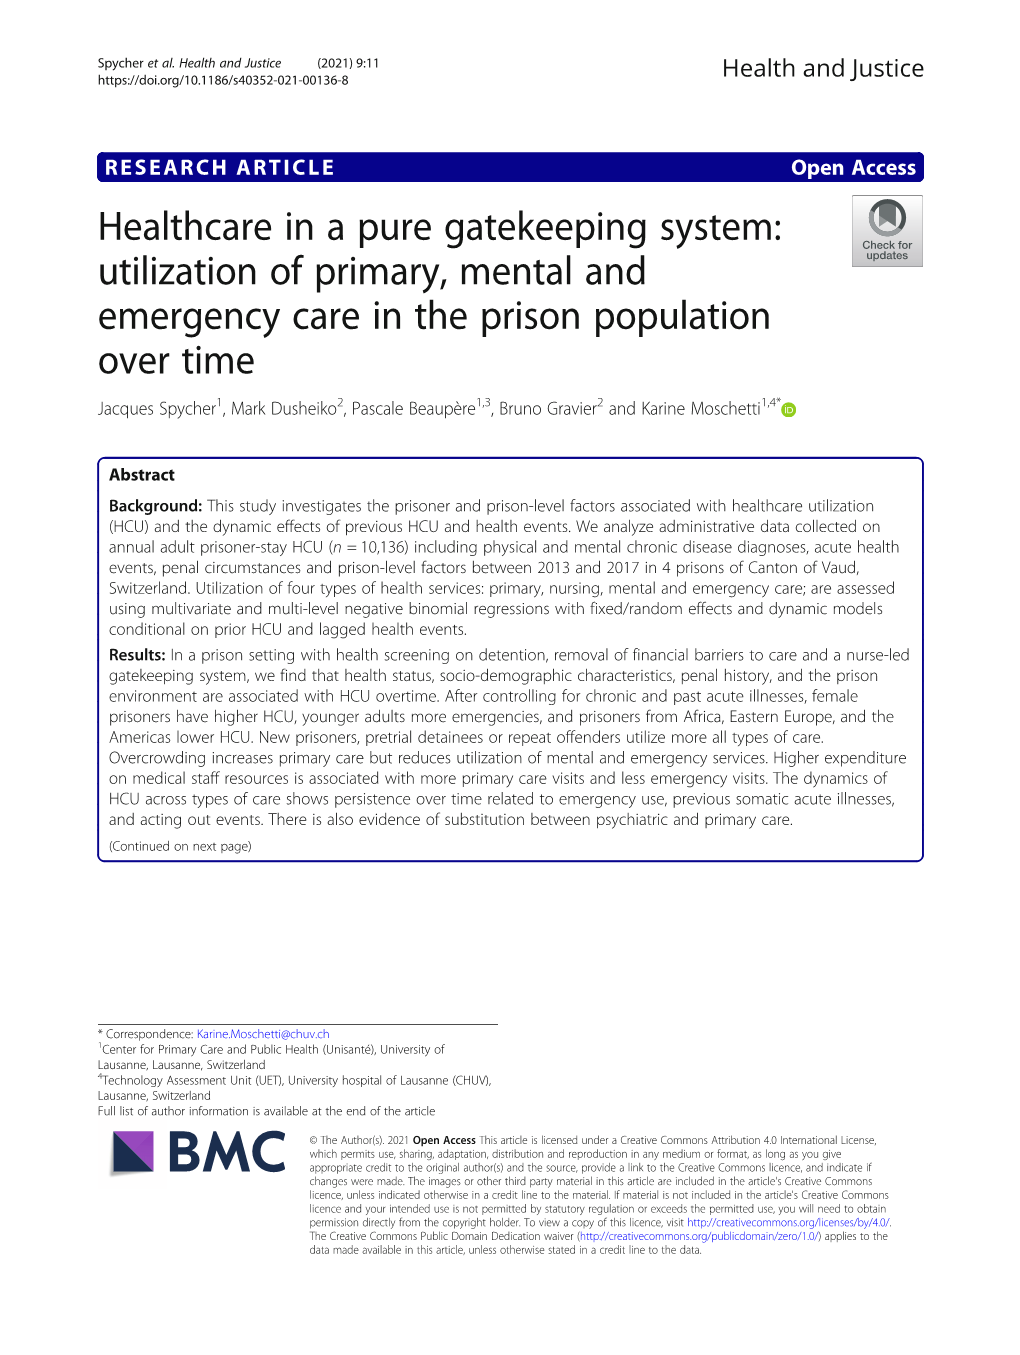 Healthcare in a Pure Gatekeeping System: Utilization of Primary, Mental and Emergency Care in the Prison Population Over Time